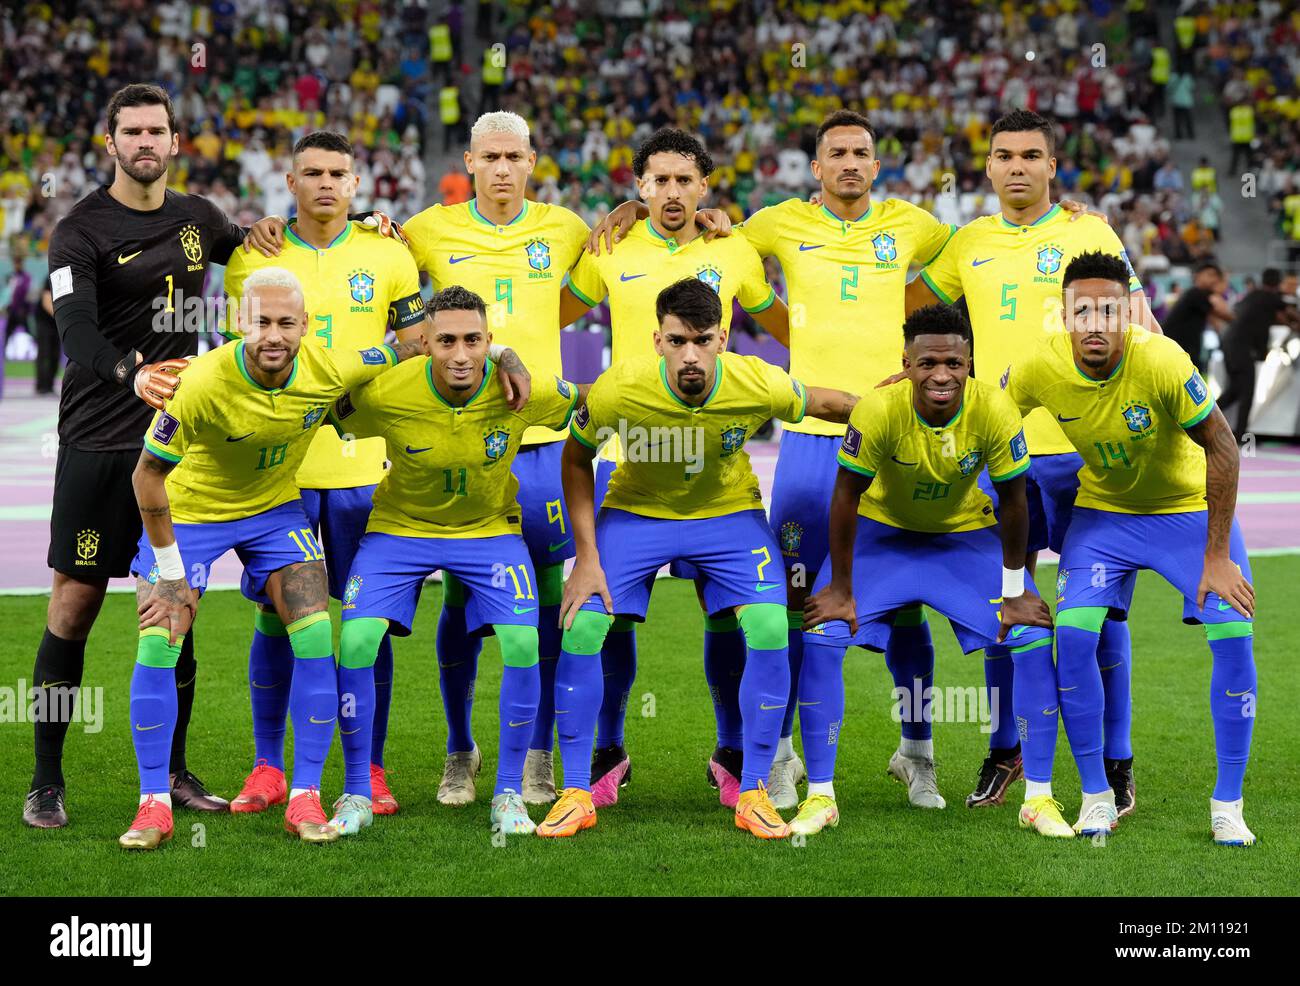 https://c8.alamy.com/comp/2M11921/a-brazil-team-group-photo-before-the-fifa-world-cup-quarter-final-match-at-the-education-city-stadium-in-al-rayyan-qatar-picture-date-friday-december-9-2022-2M11921.jpg